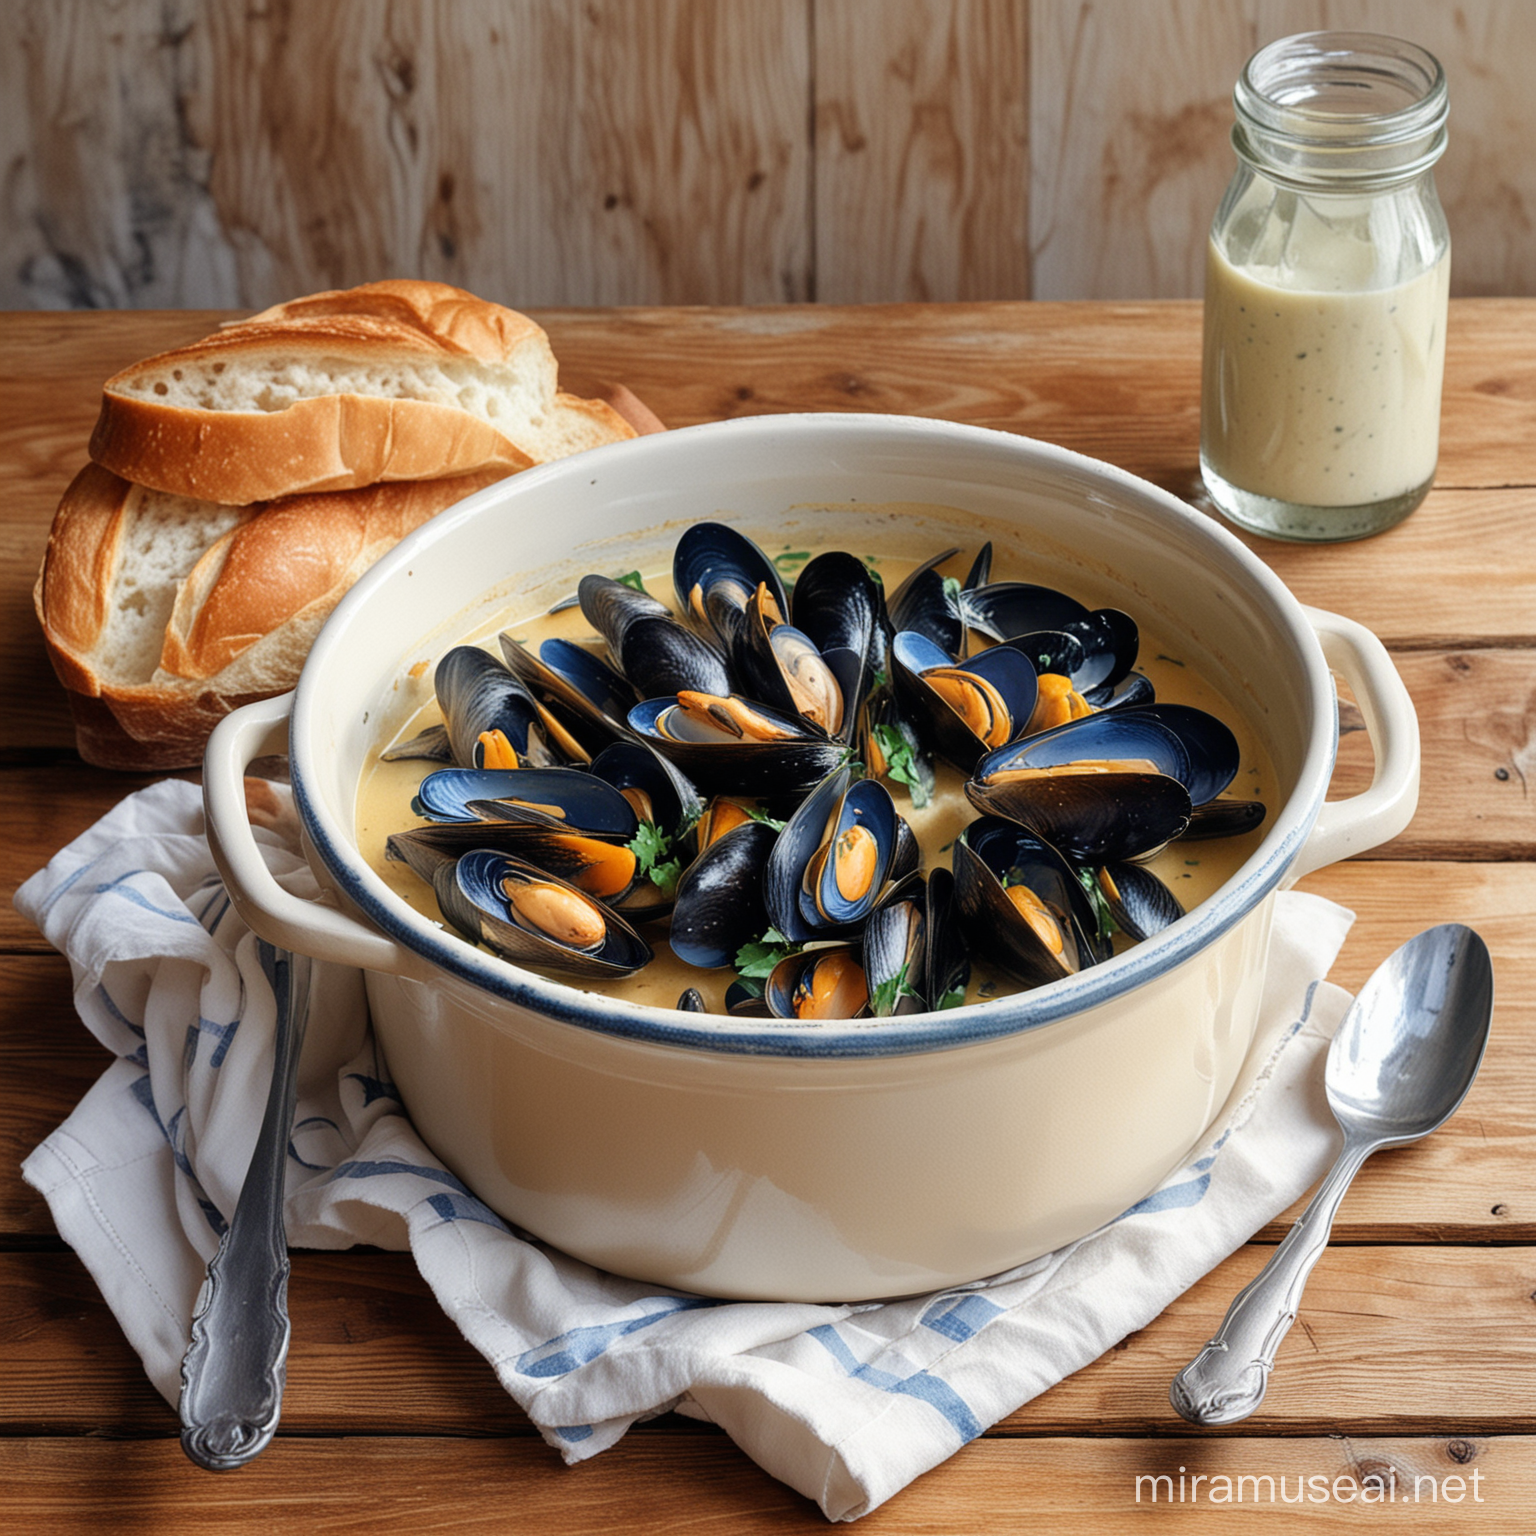 image of a saucepan with mussels in a creamy sauce, on a wooden table in Provencal style - painted in watercolor